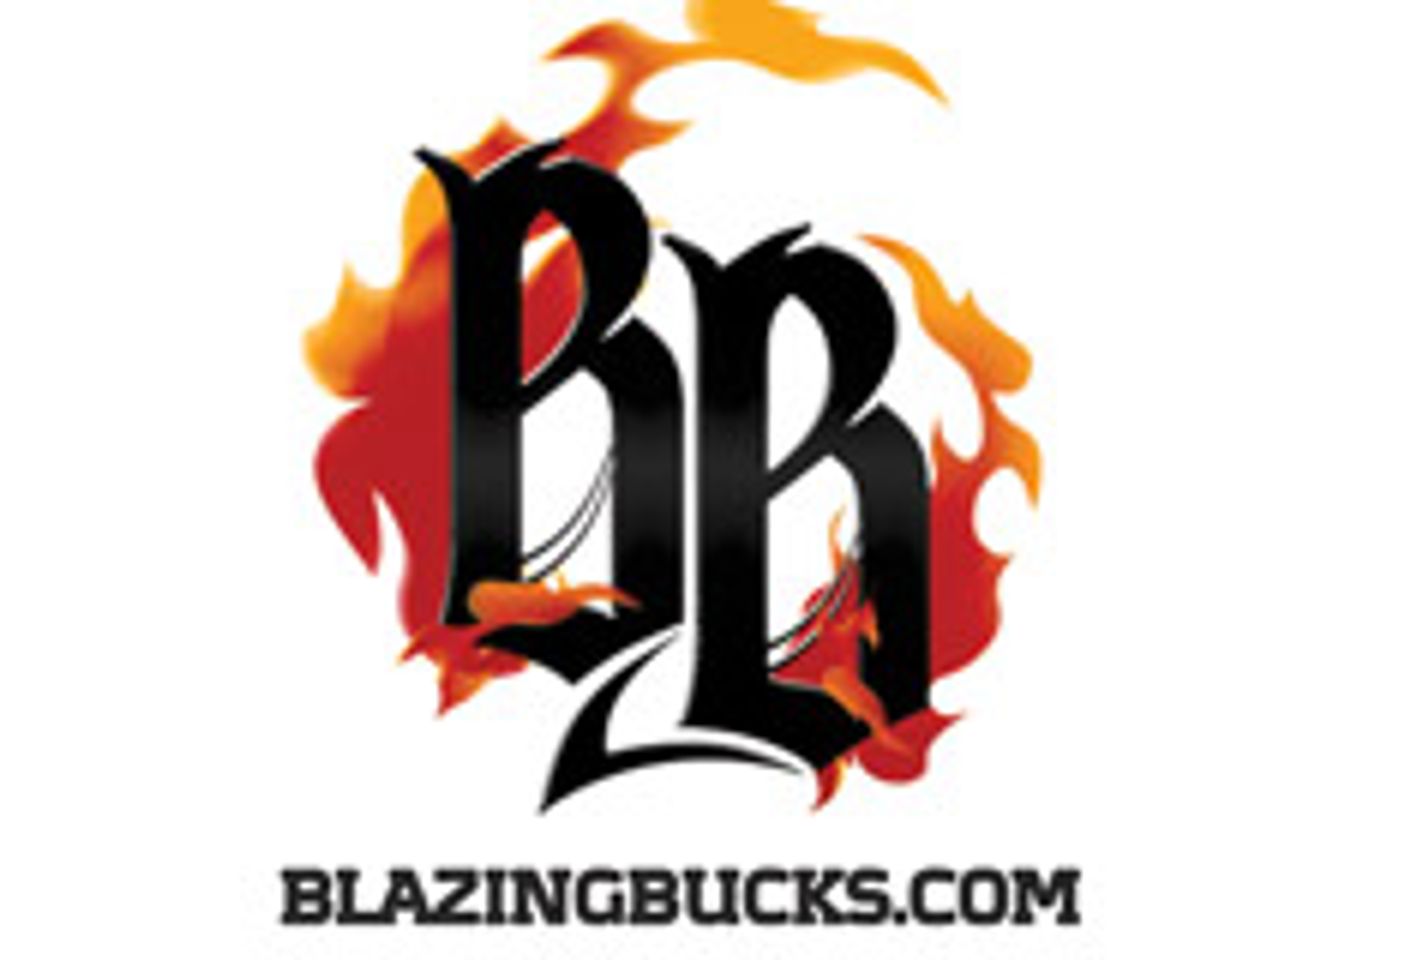 BlazingBucks Launches New Interface and Full 1080 HD Streaming